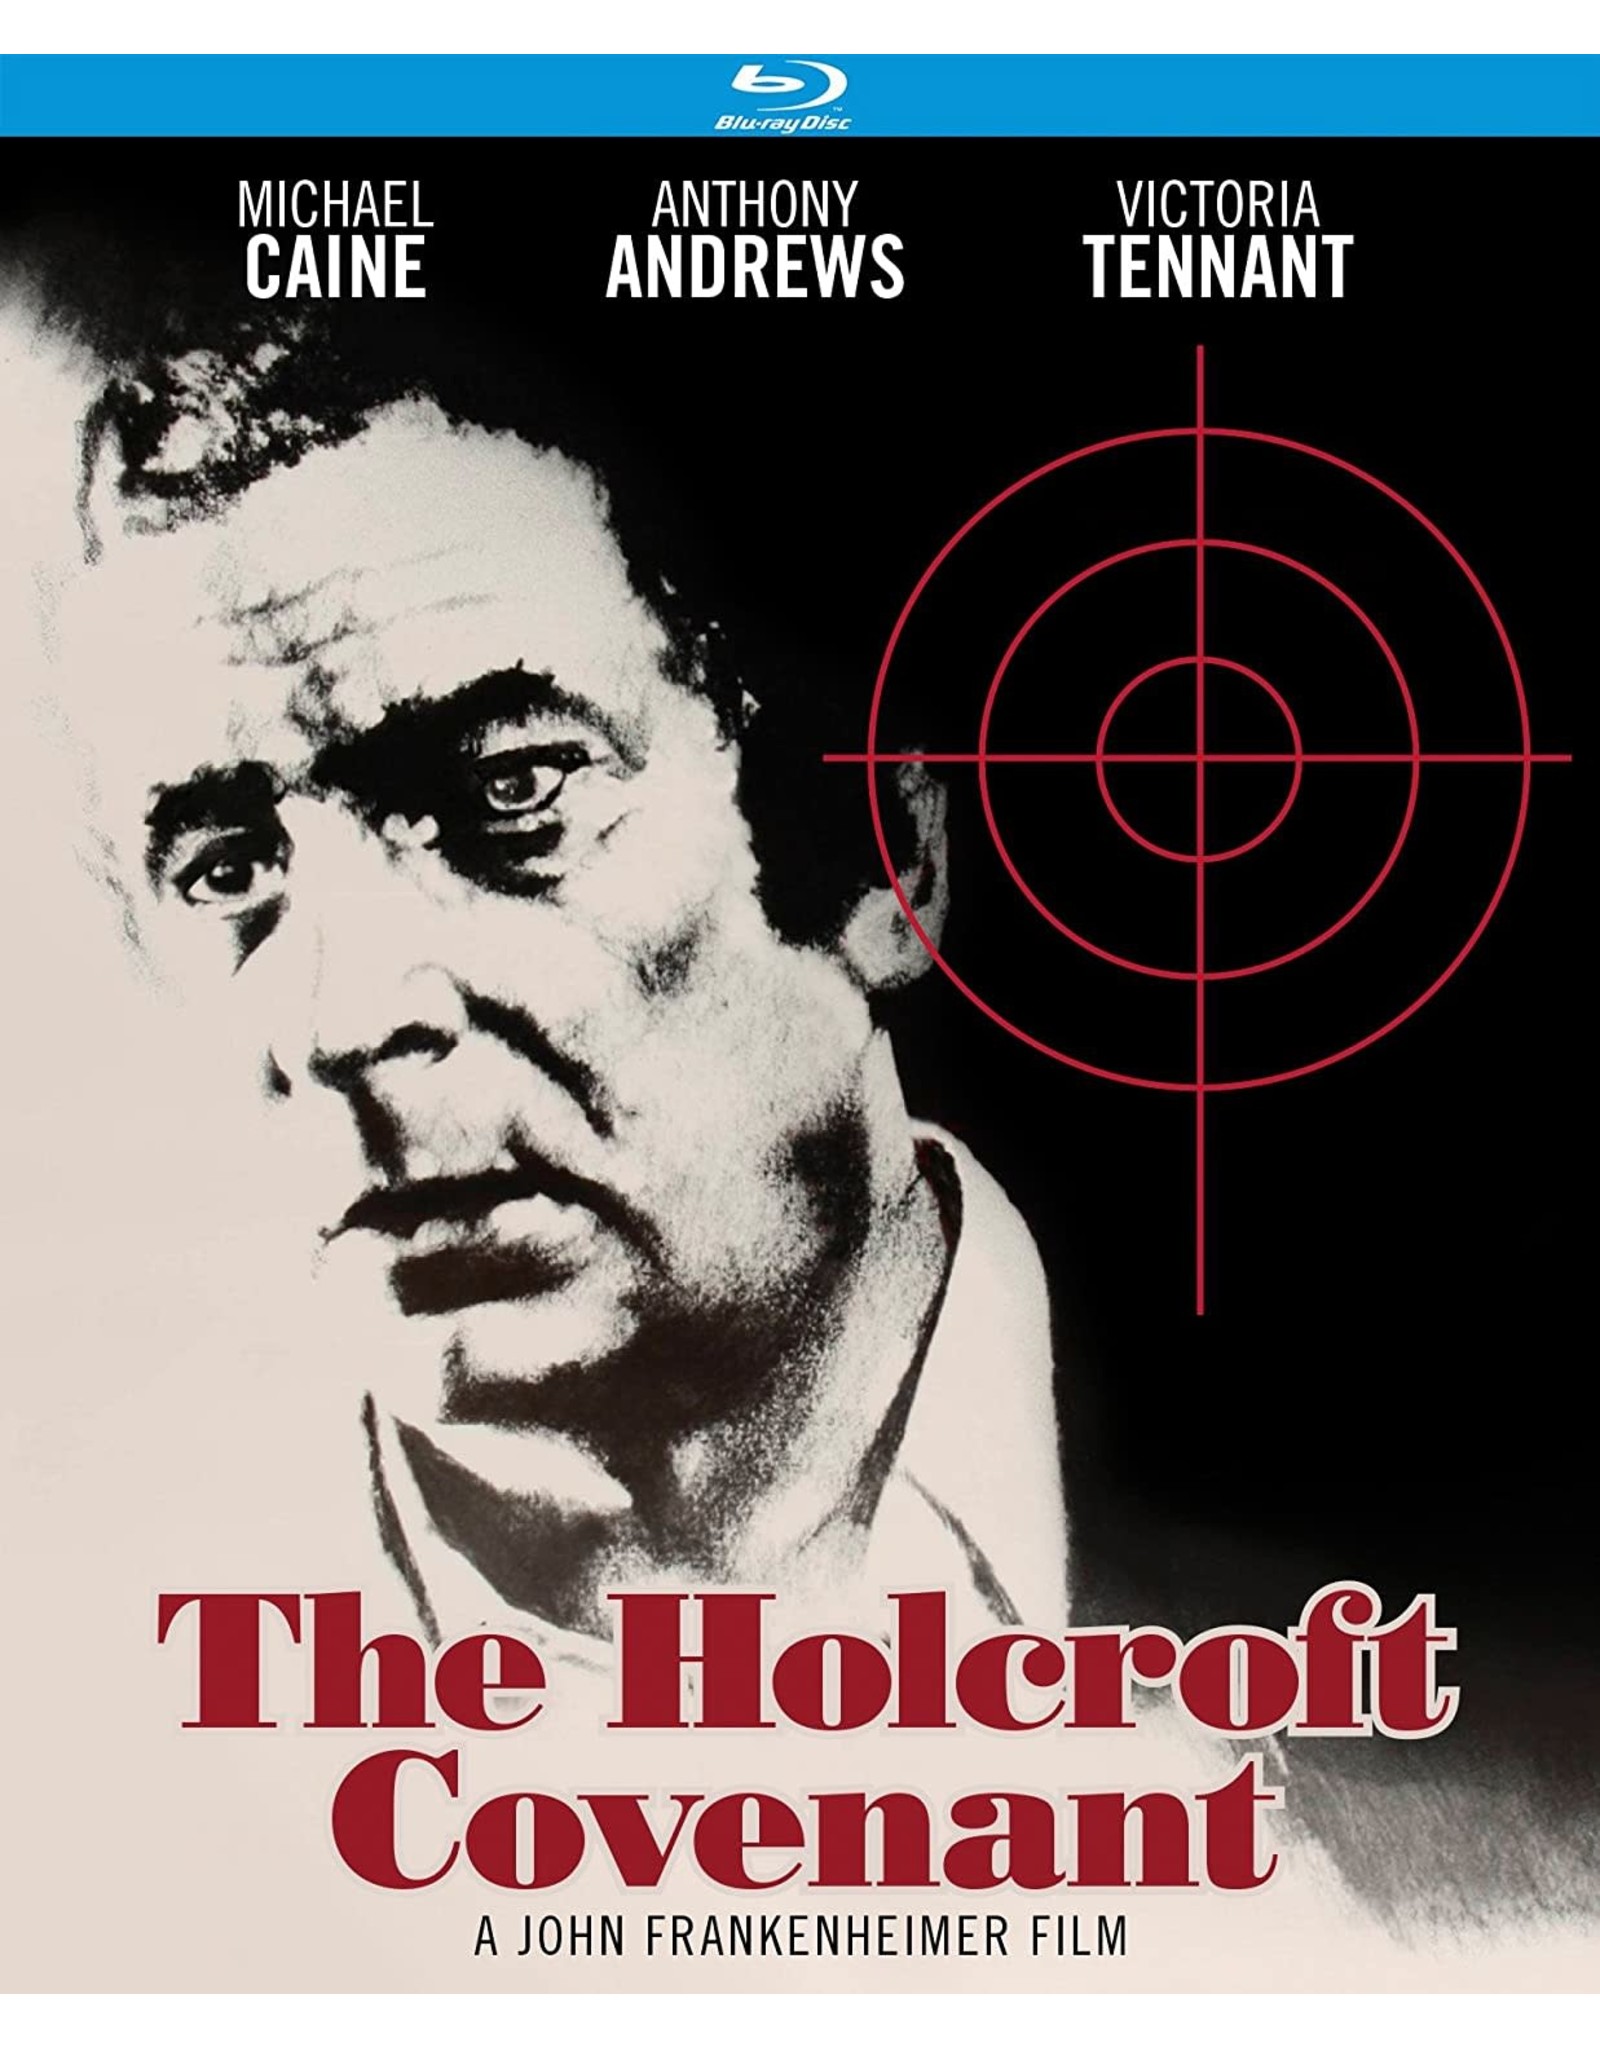 Cult & Cool Holcroft Covenant, The - Kino Lorber (Used)